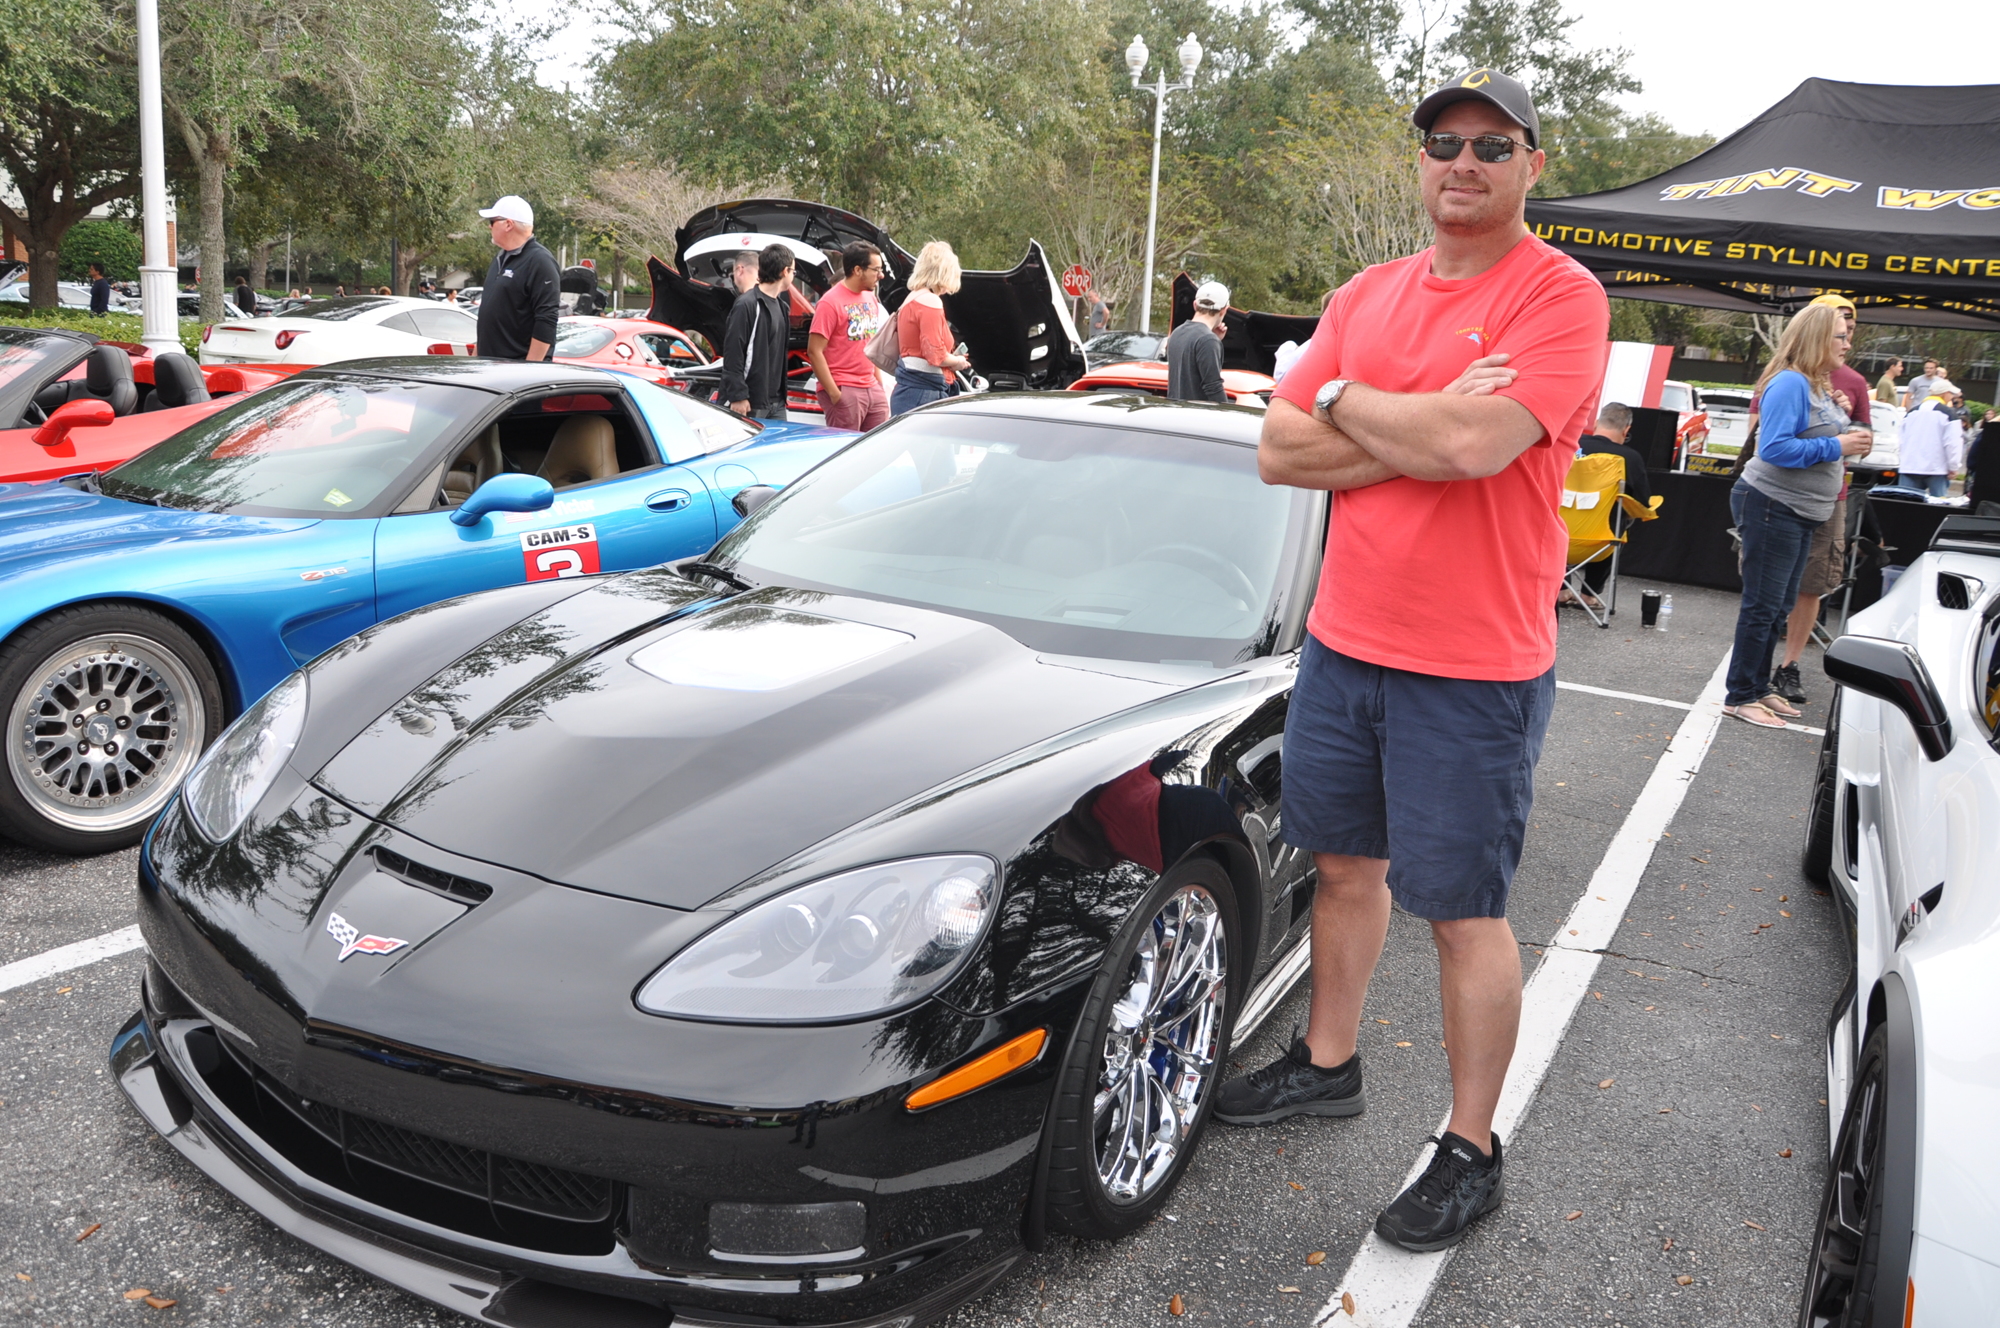 Michael Senich pulled up in his 2010 Corvette ZR1 at the event.